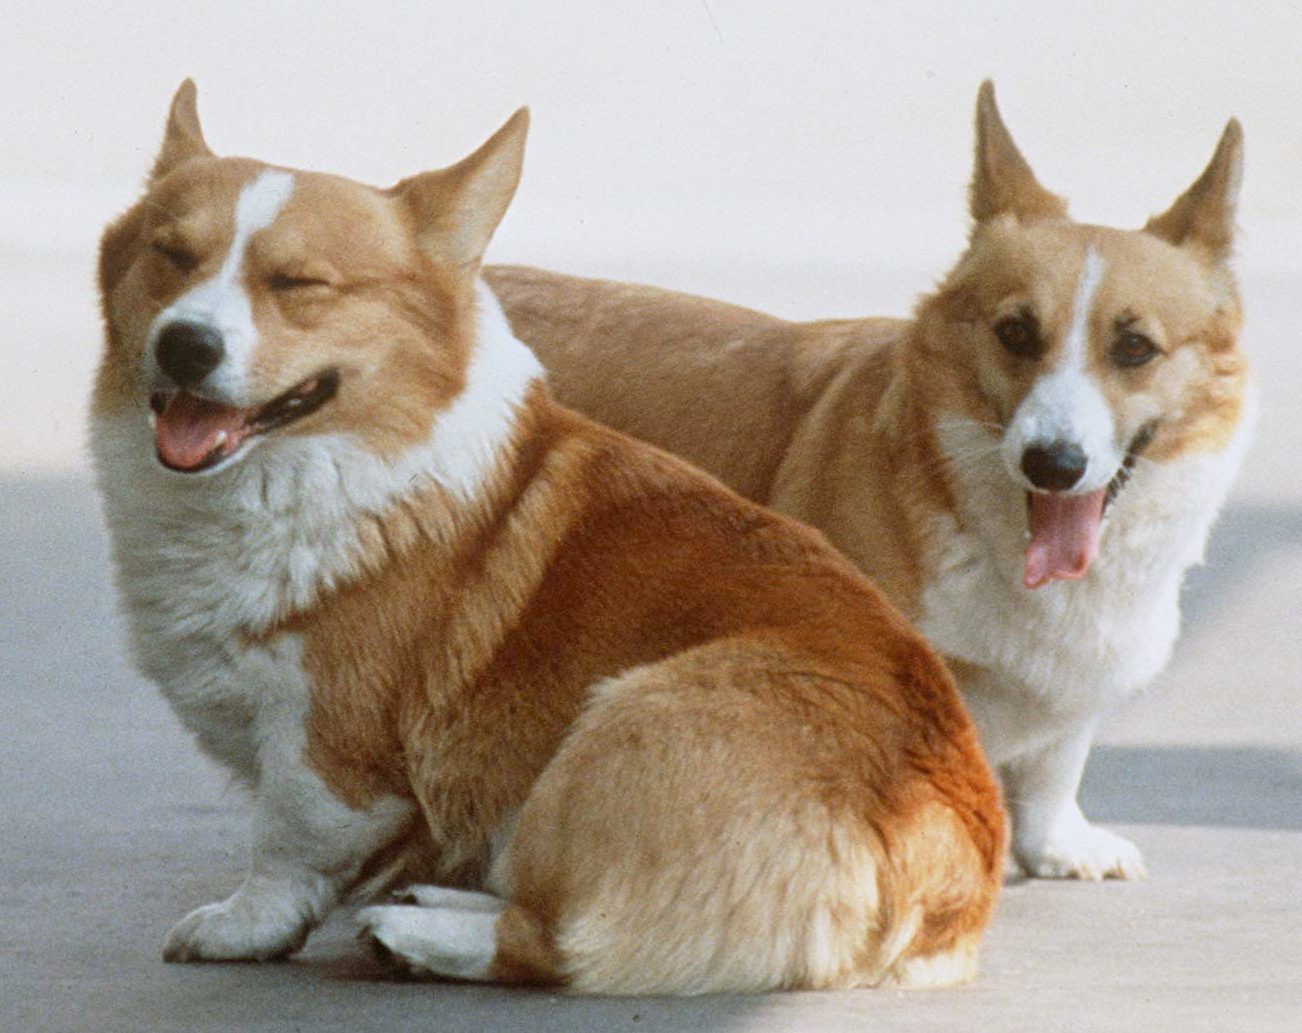 The personal assistants second book is about the Queens corgis